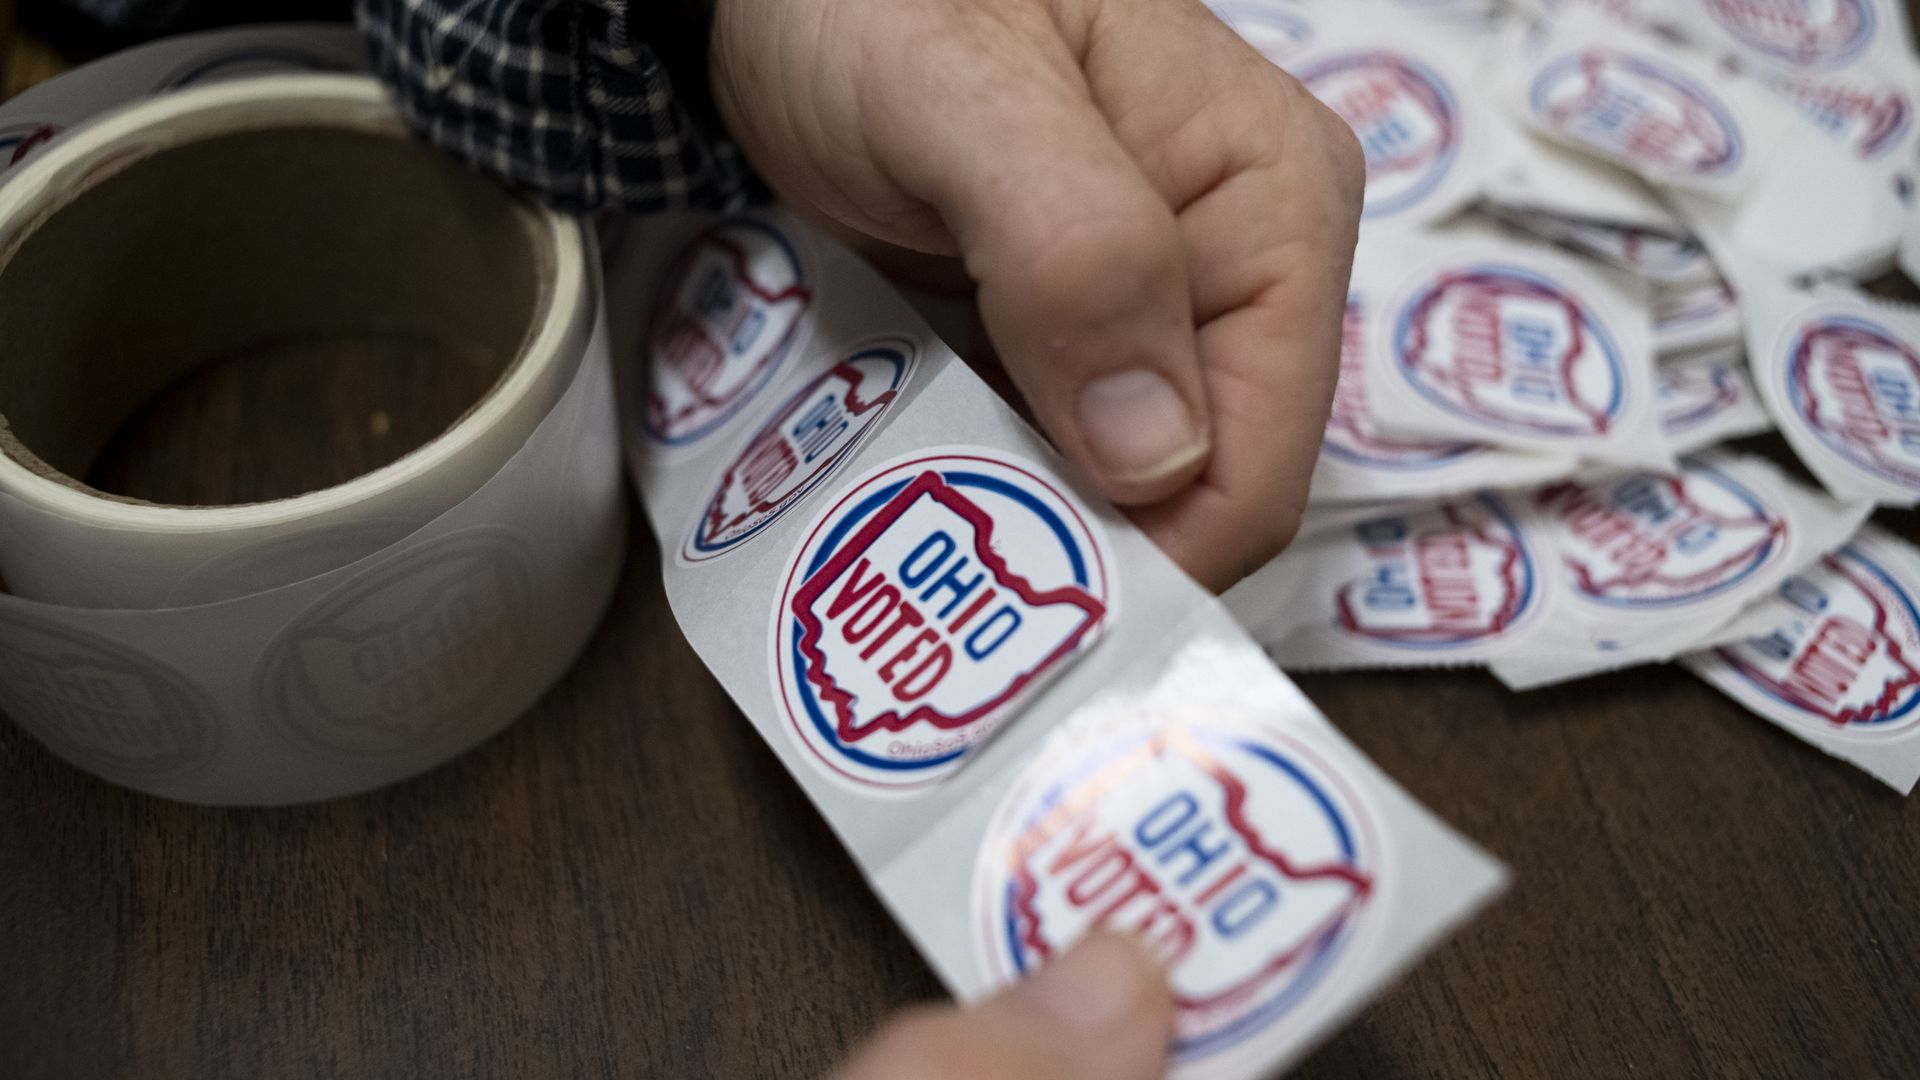 A person pulls off "Ohio Voted" stickers at a polling place.